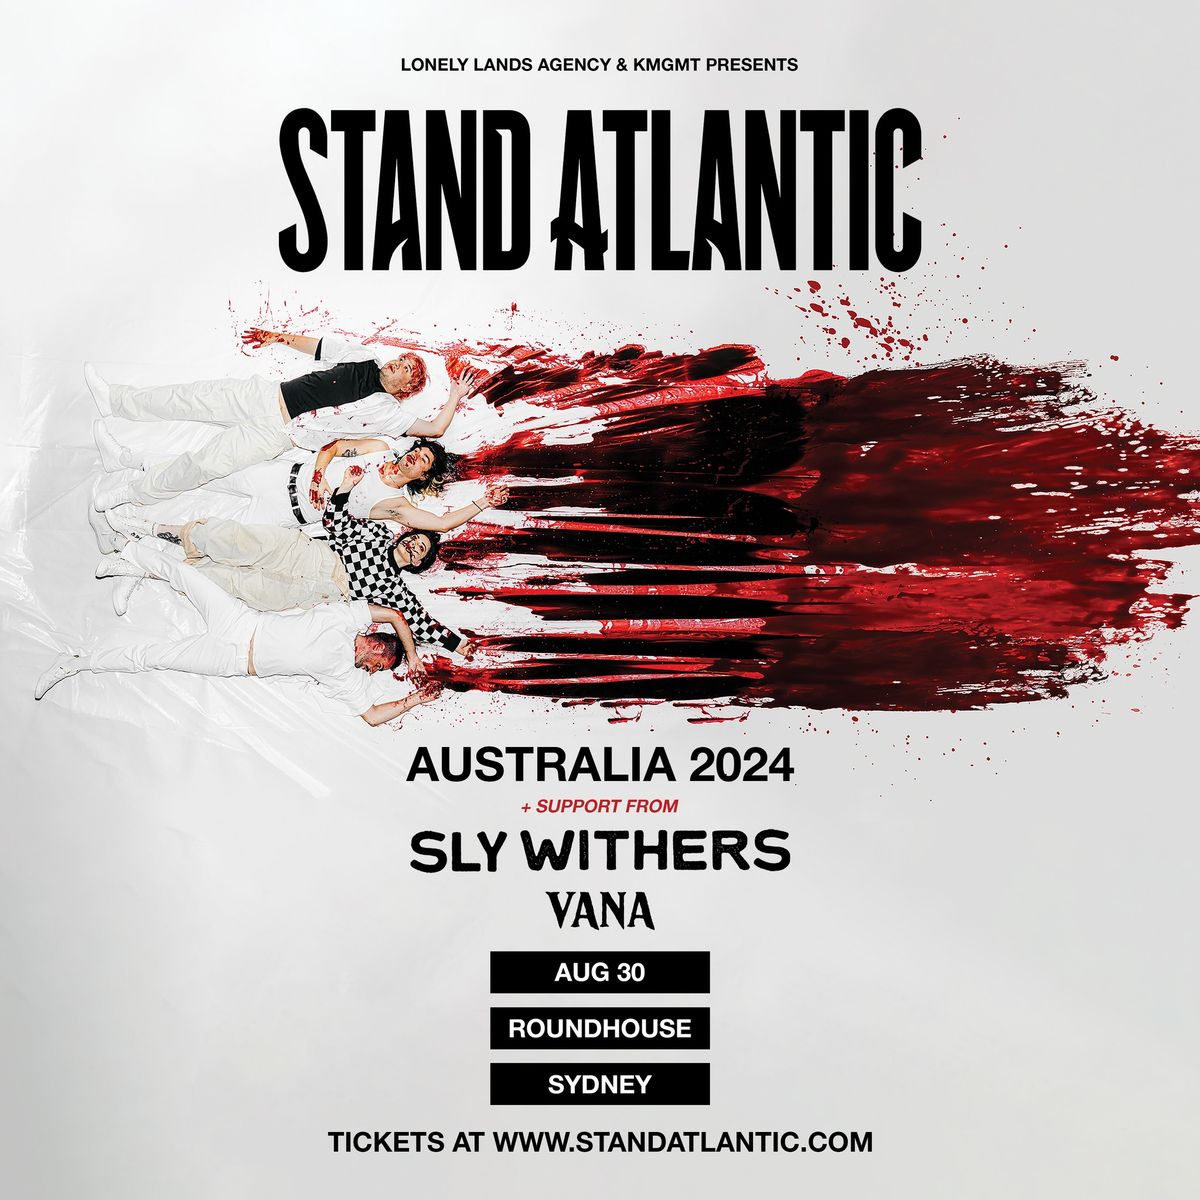 [SYDNEY] - Stand Atlantic + Sly Withers + VANA @ Roundhouse